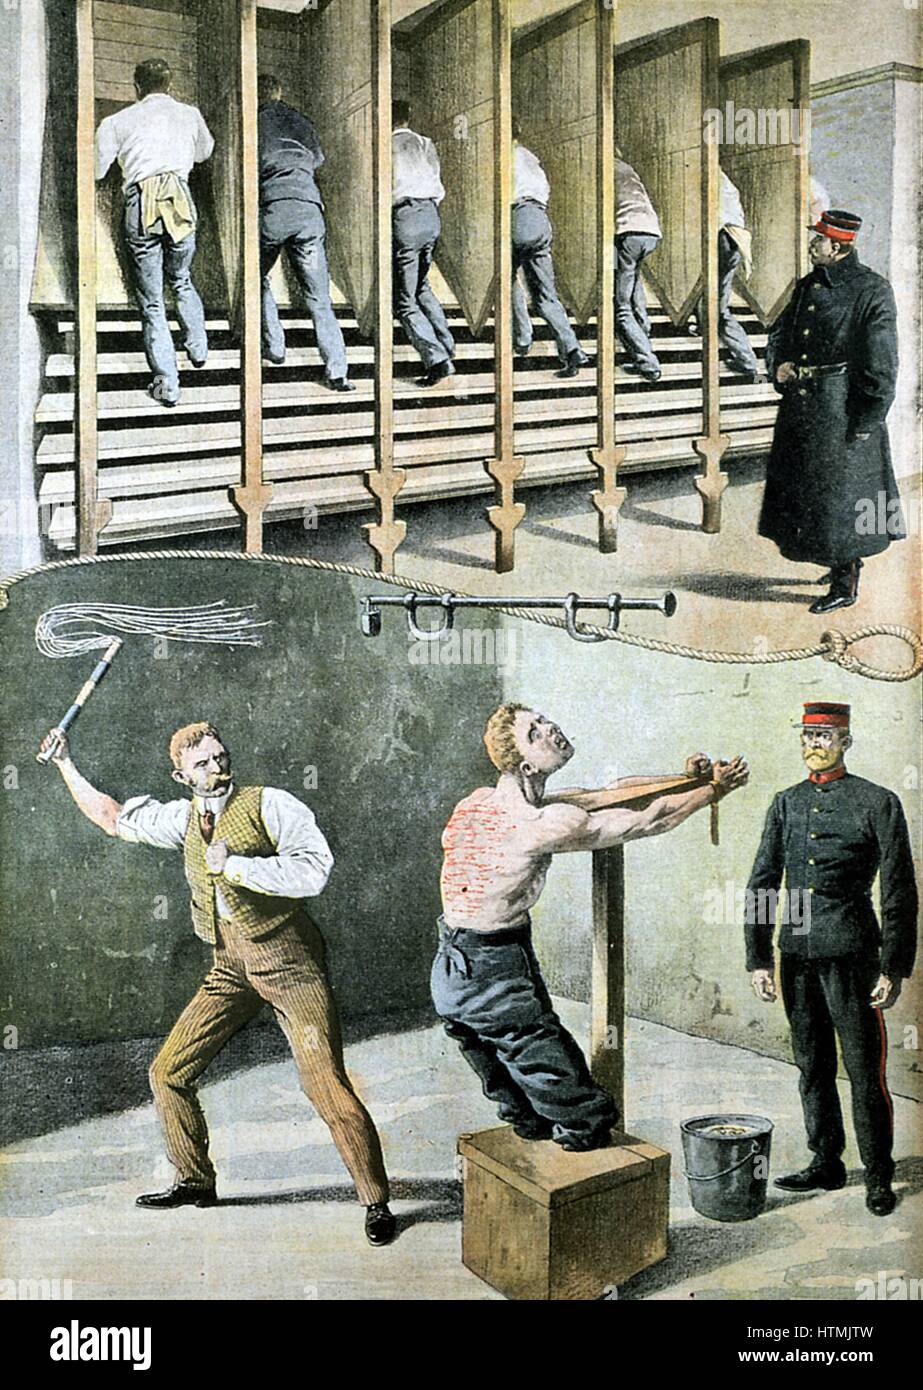 English prison life: treadmill for hard labour, and punishment with the cat-o-nine-tails. France was suffering from the Apaches at this time, and some thought the prisons should be made less comfortable and more like British ones. From 'Le Petit Journal', Paris, November 1907 Stock Photo